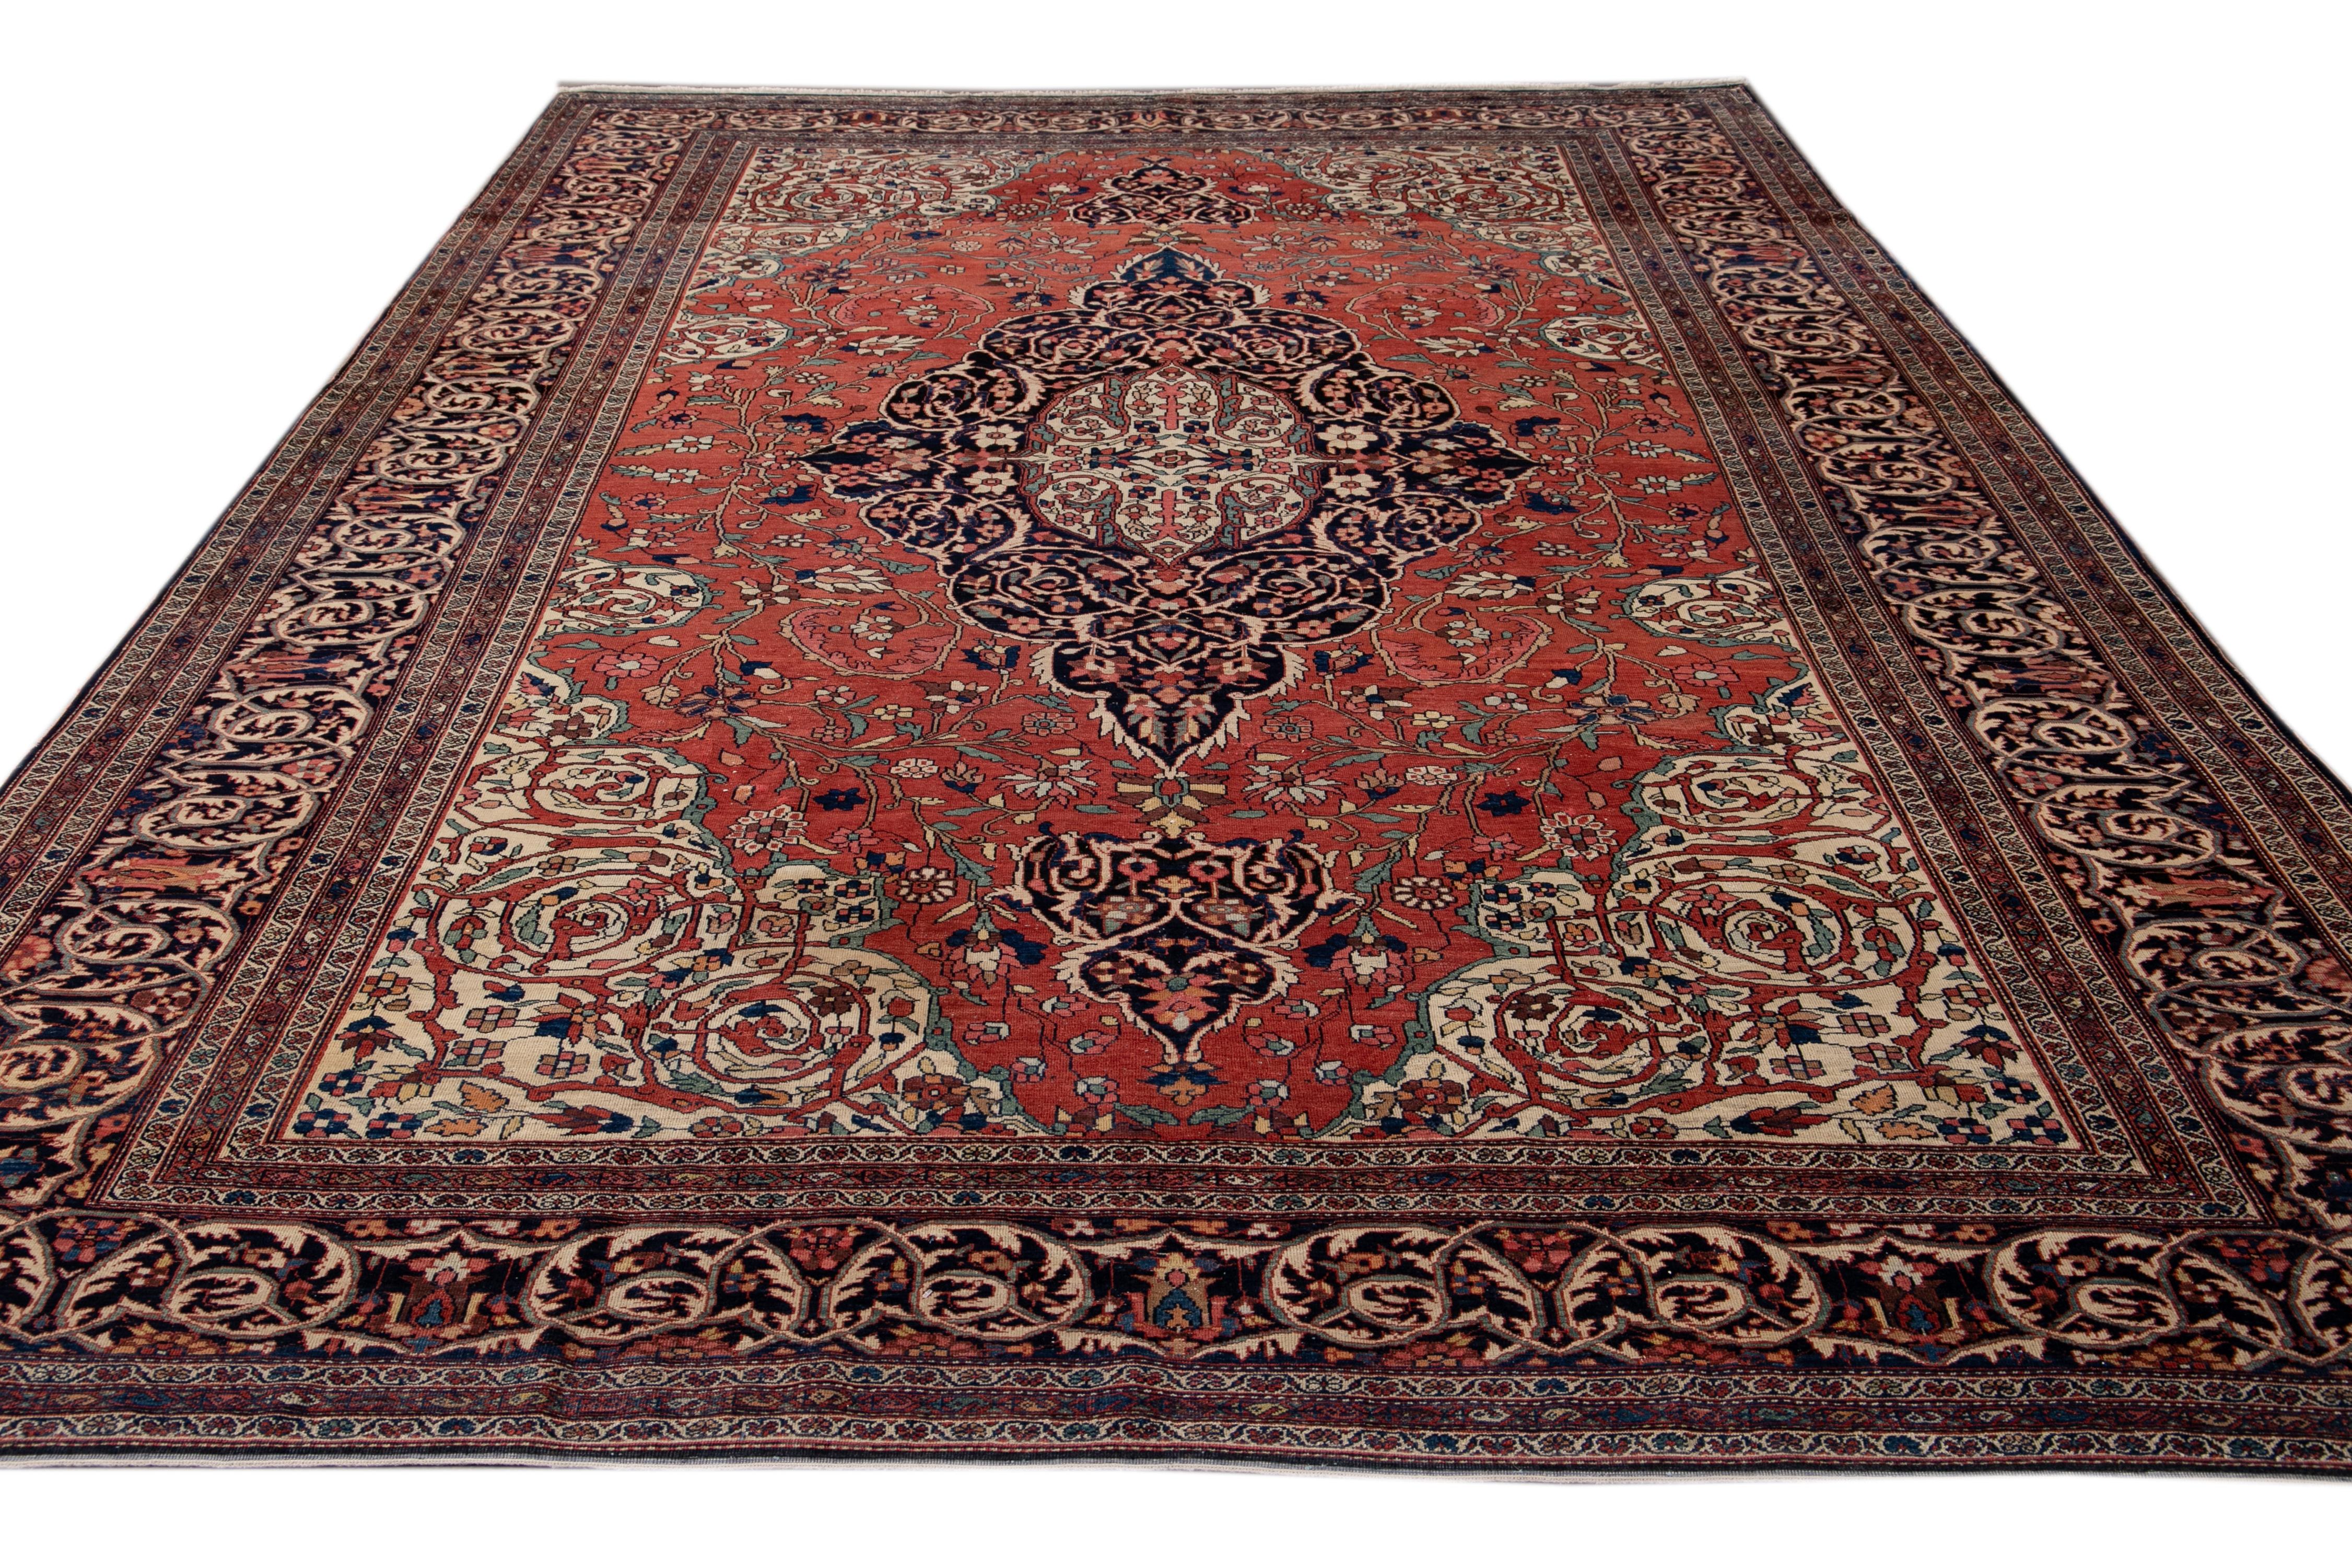 Beautiful antique Farahan hand-knotted wool rug with a red field. This Persian rug has multi-color accents on a Classic floral medallion design.

This rug measures 8'9